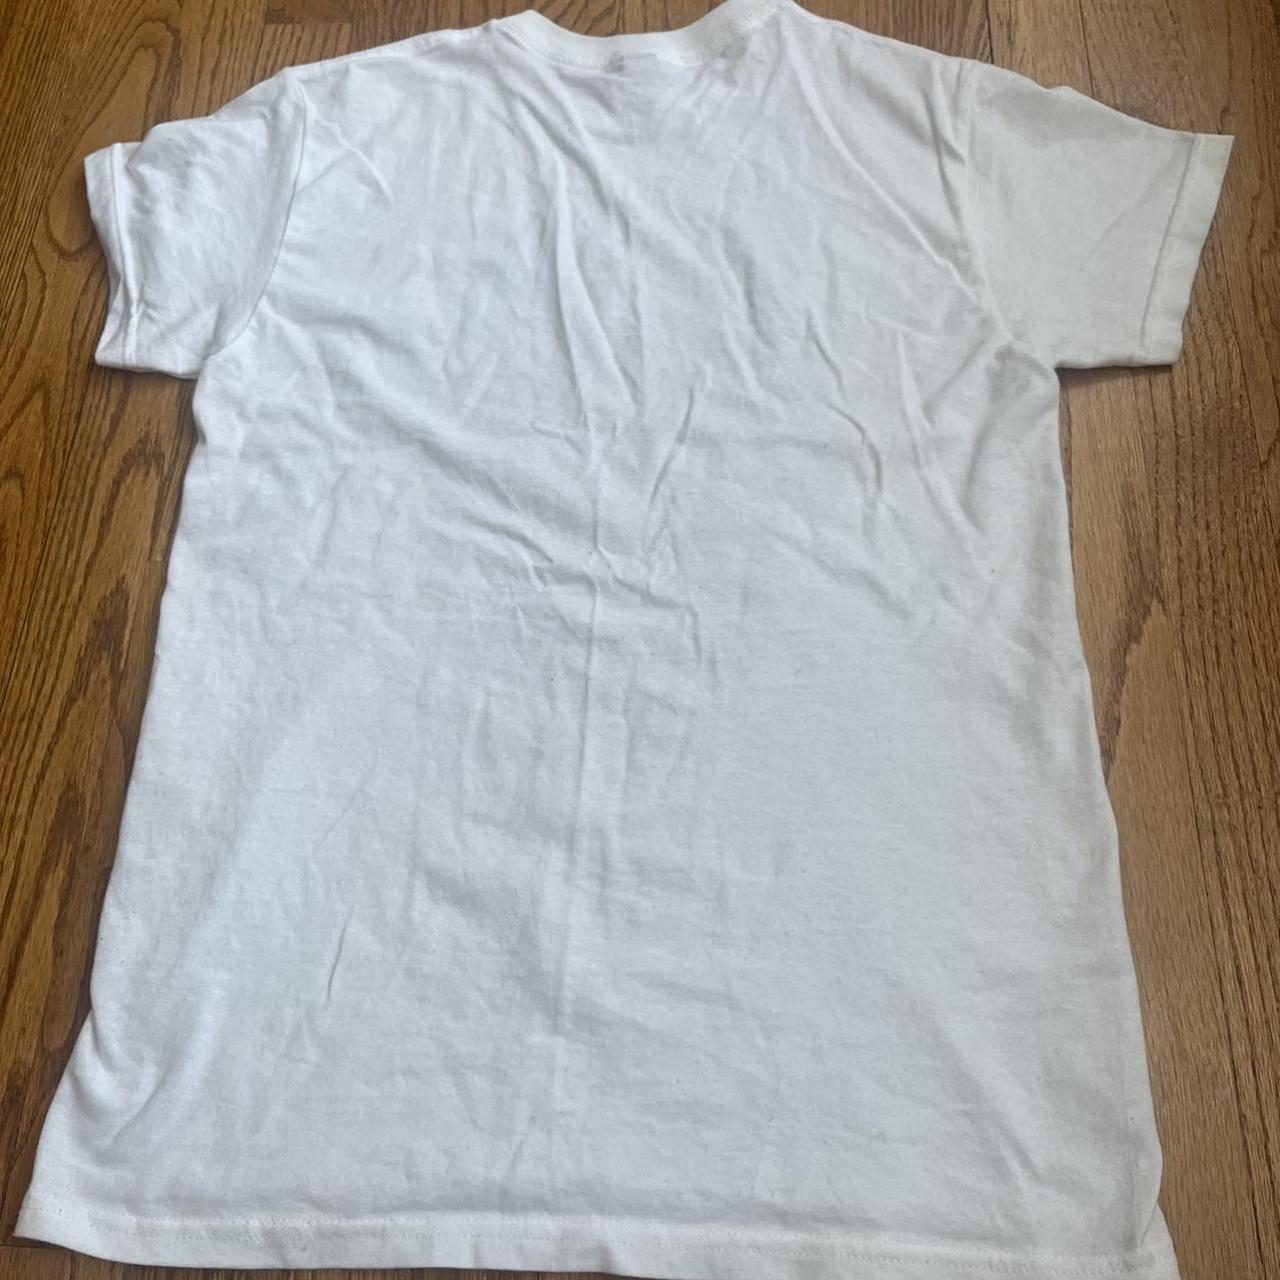 Men's White and Brown T-shirt | Depop